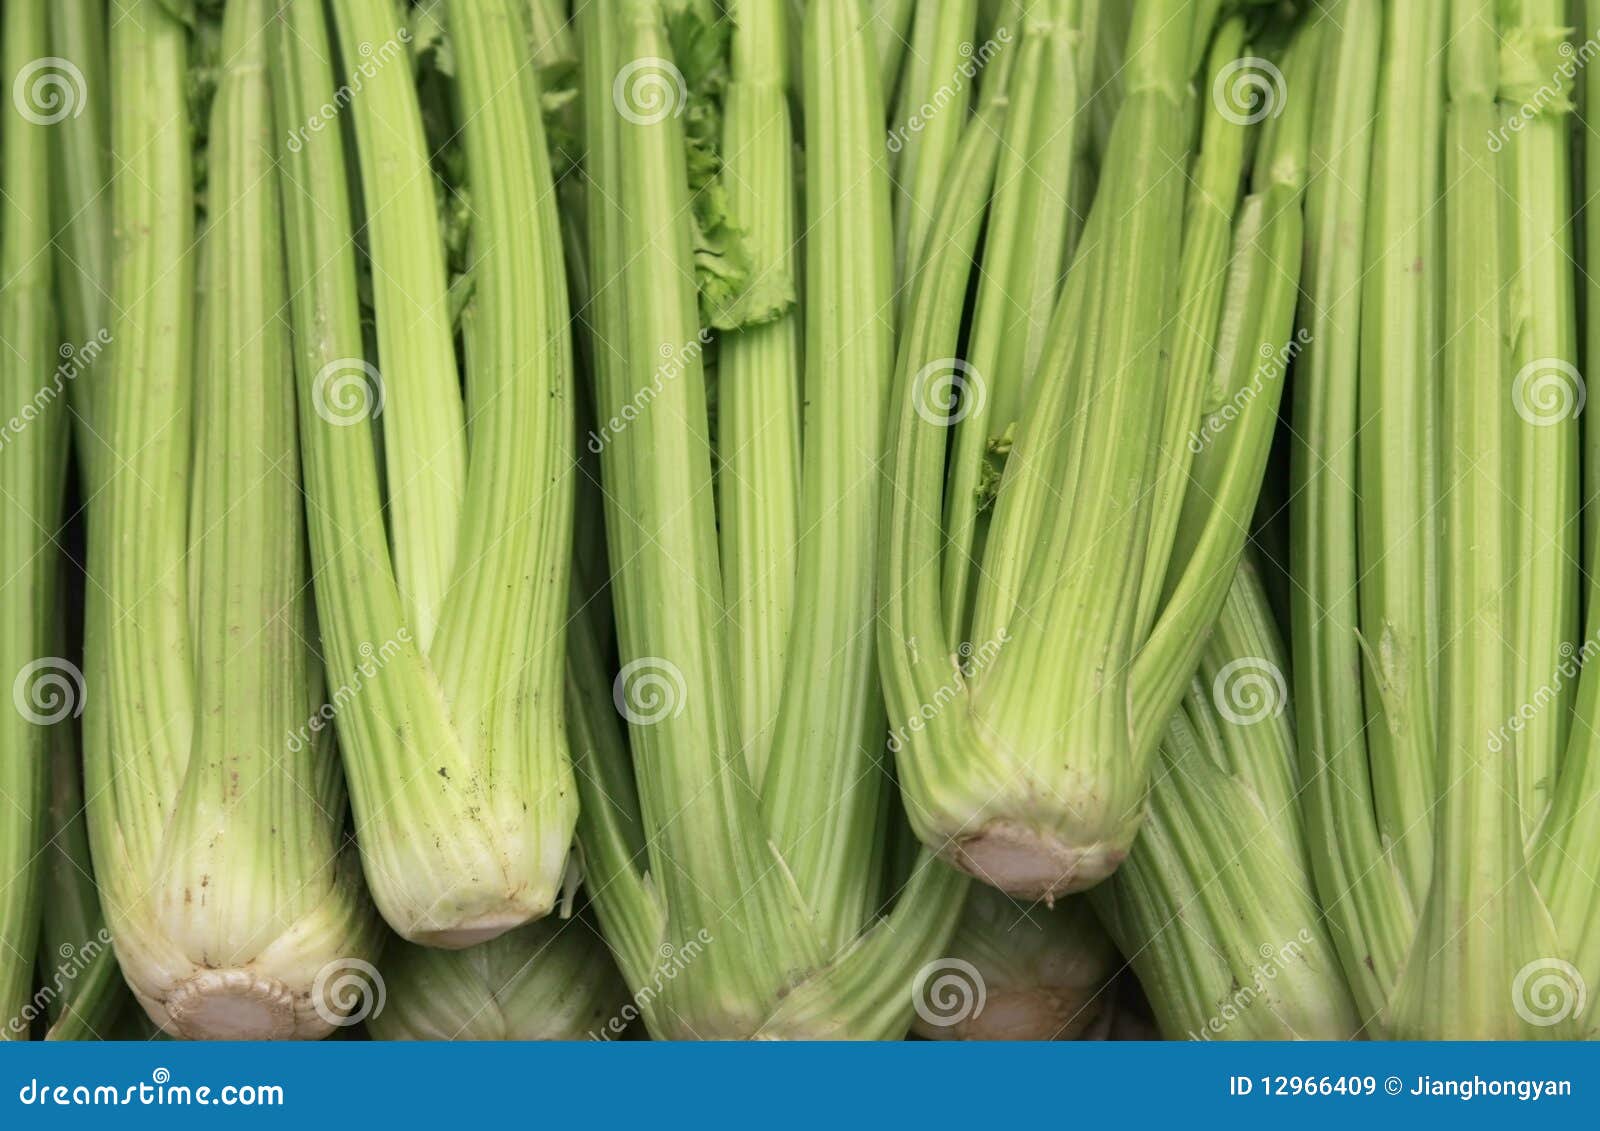 A bunch of celery in the supermarket of the close-up